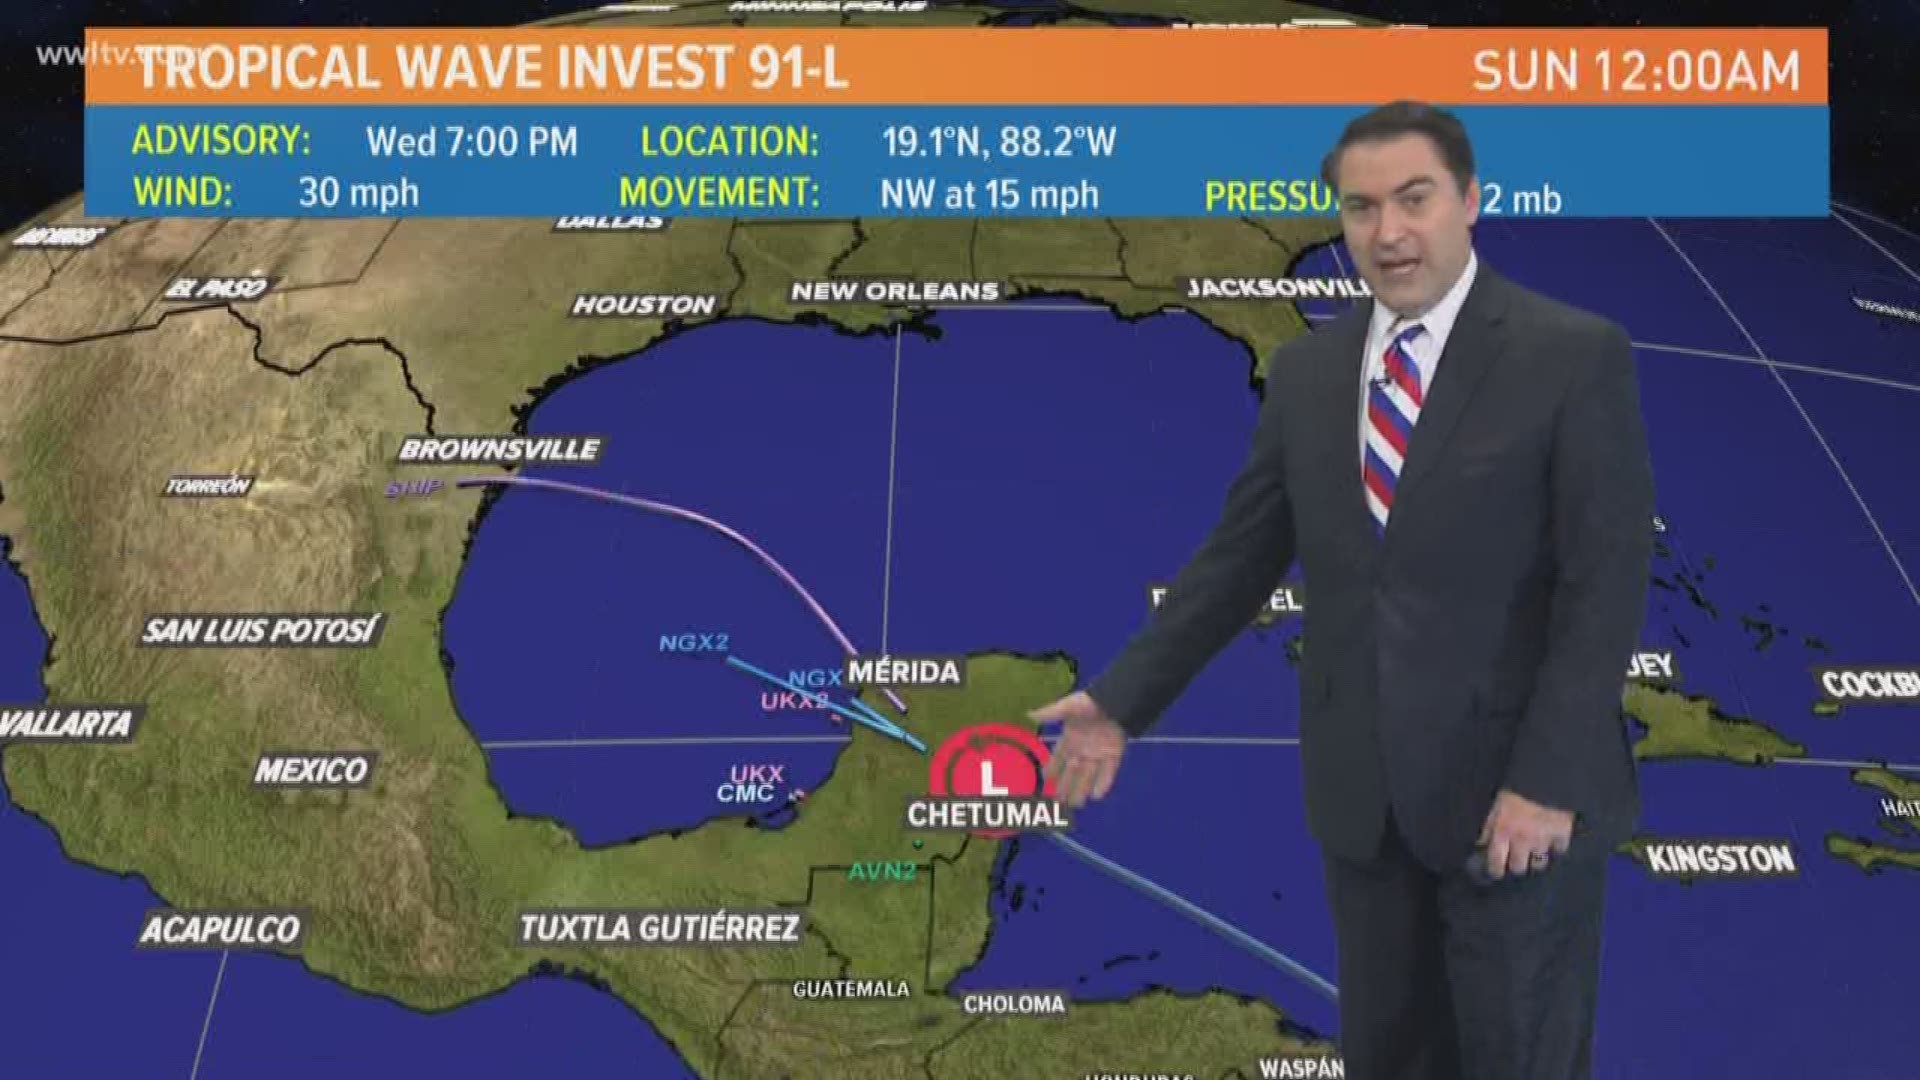 Tropical Update: low chance for development for Invest 91L